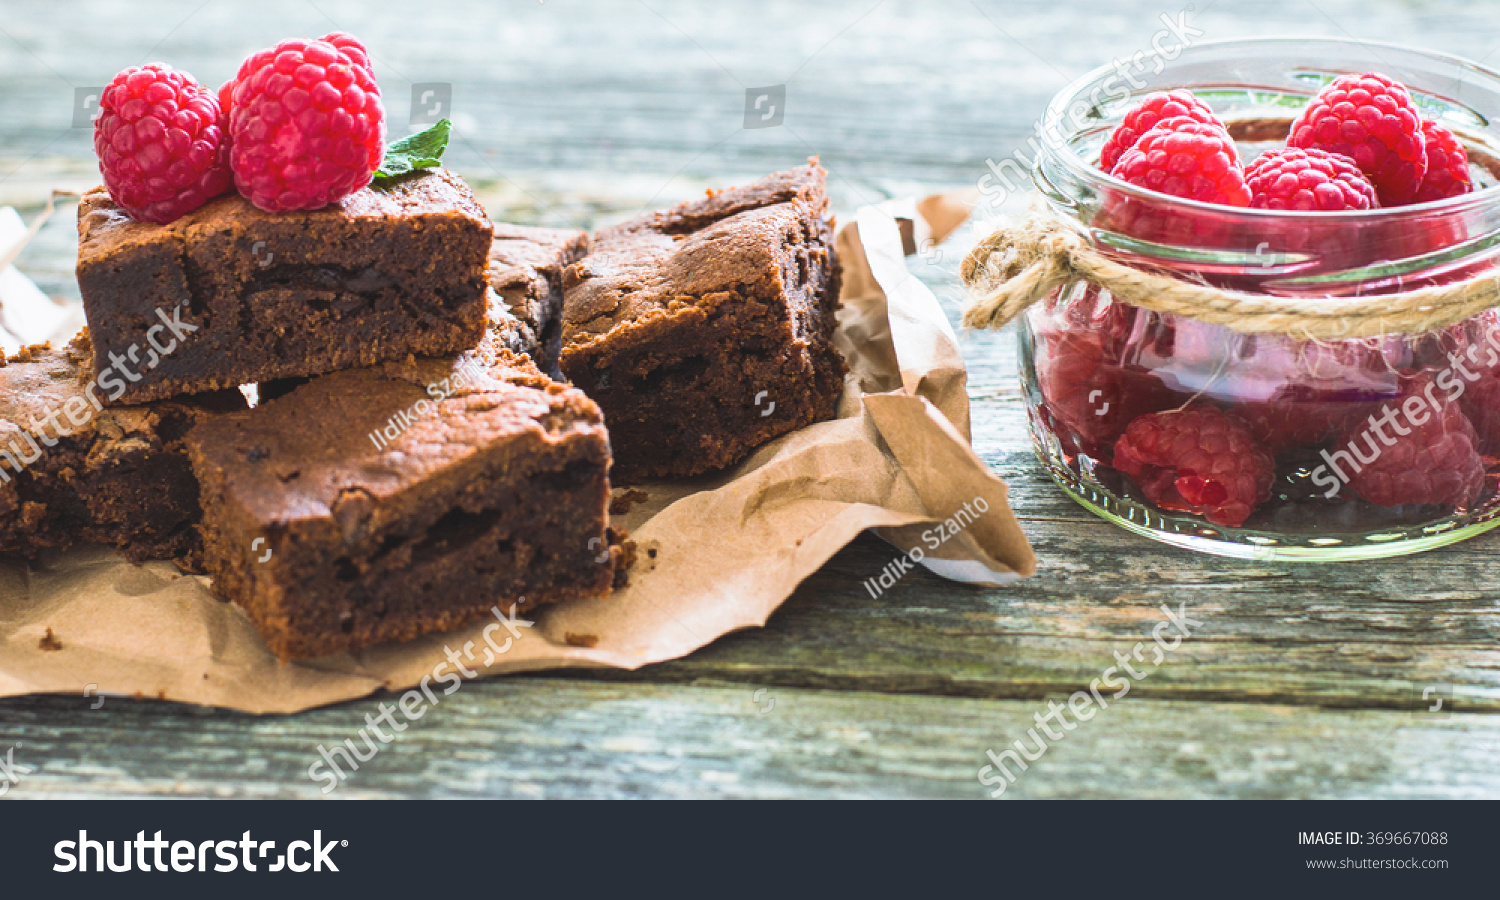 Chocolate brownies with raspberry on a wooden background #369667088